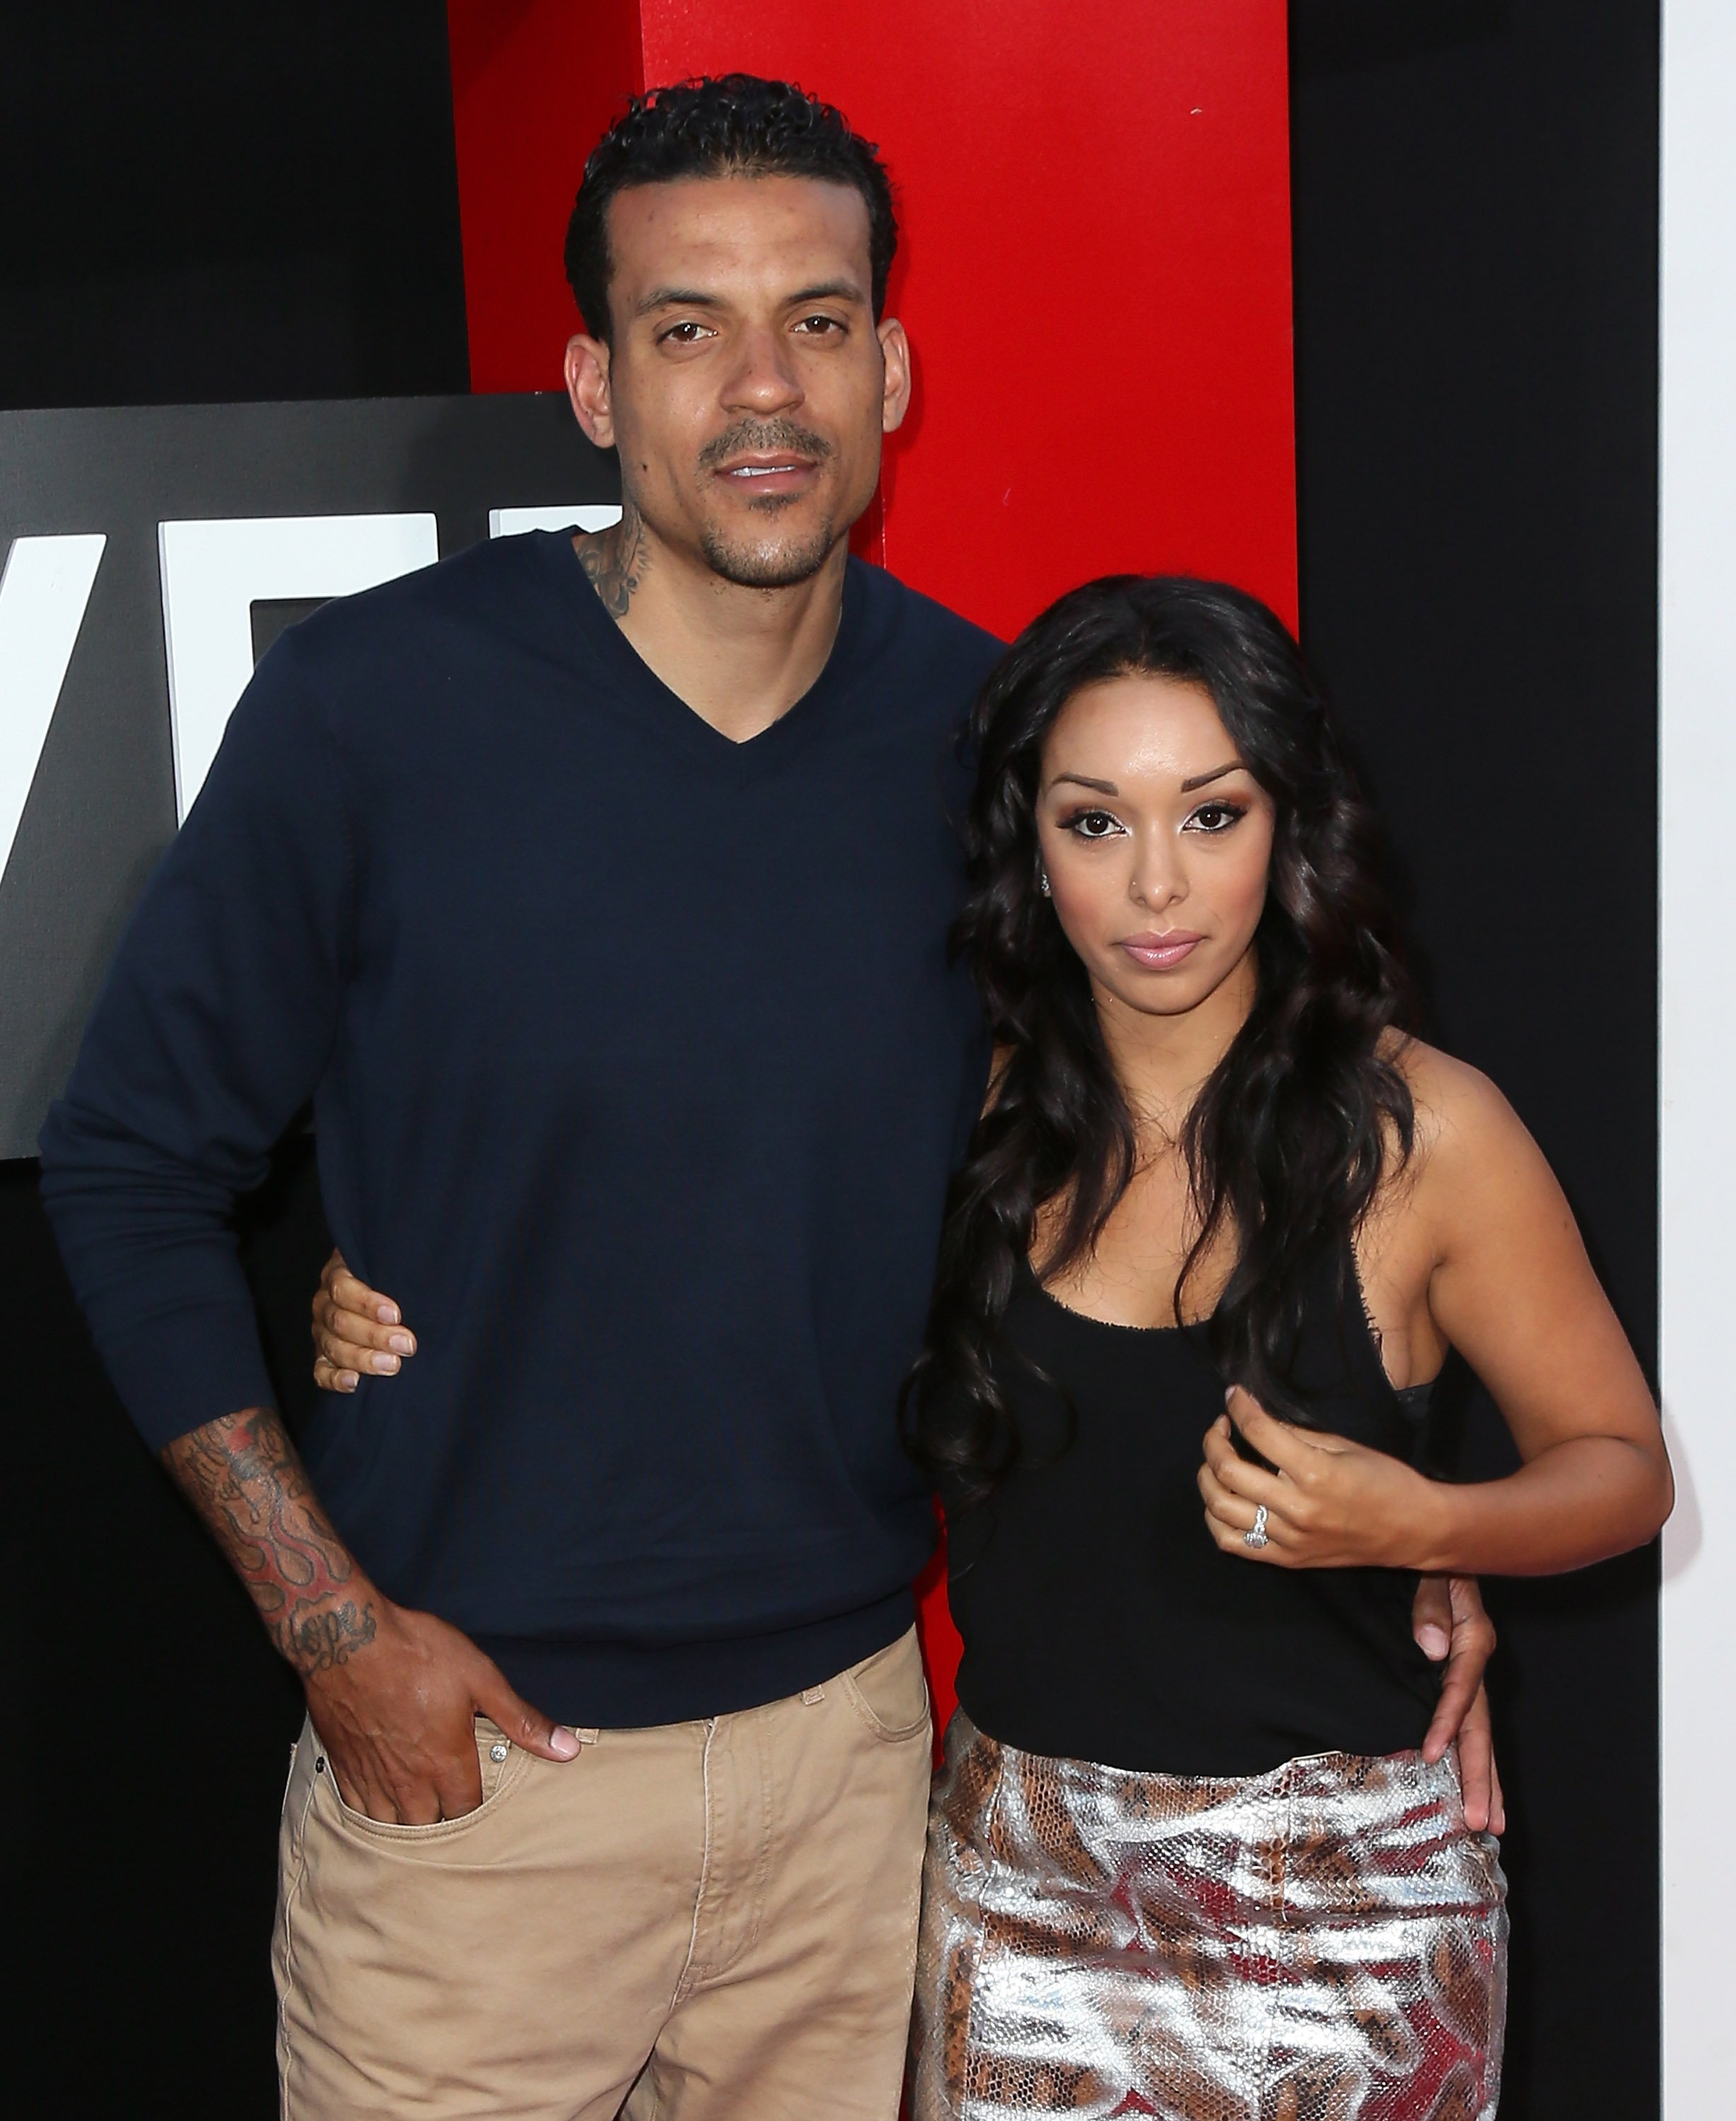 Matt Barnes and Gloria Govan attend the premiere of Warner Bros. Pictures' "Hangover Part III" on May 20, 2013 in Westwood, California.  | Source: Getty Images